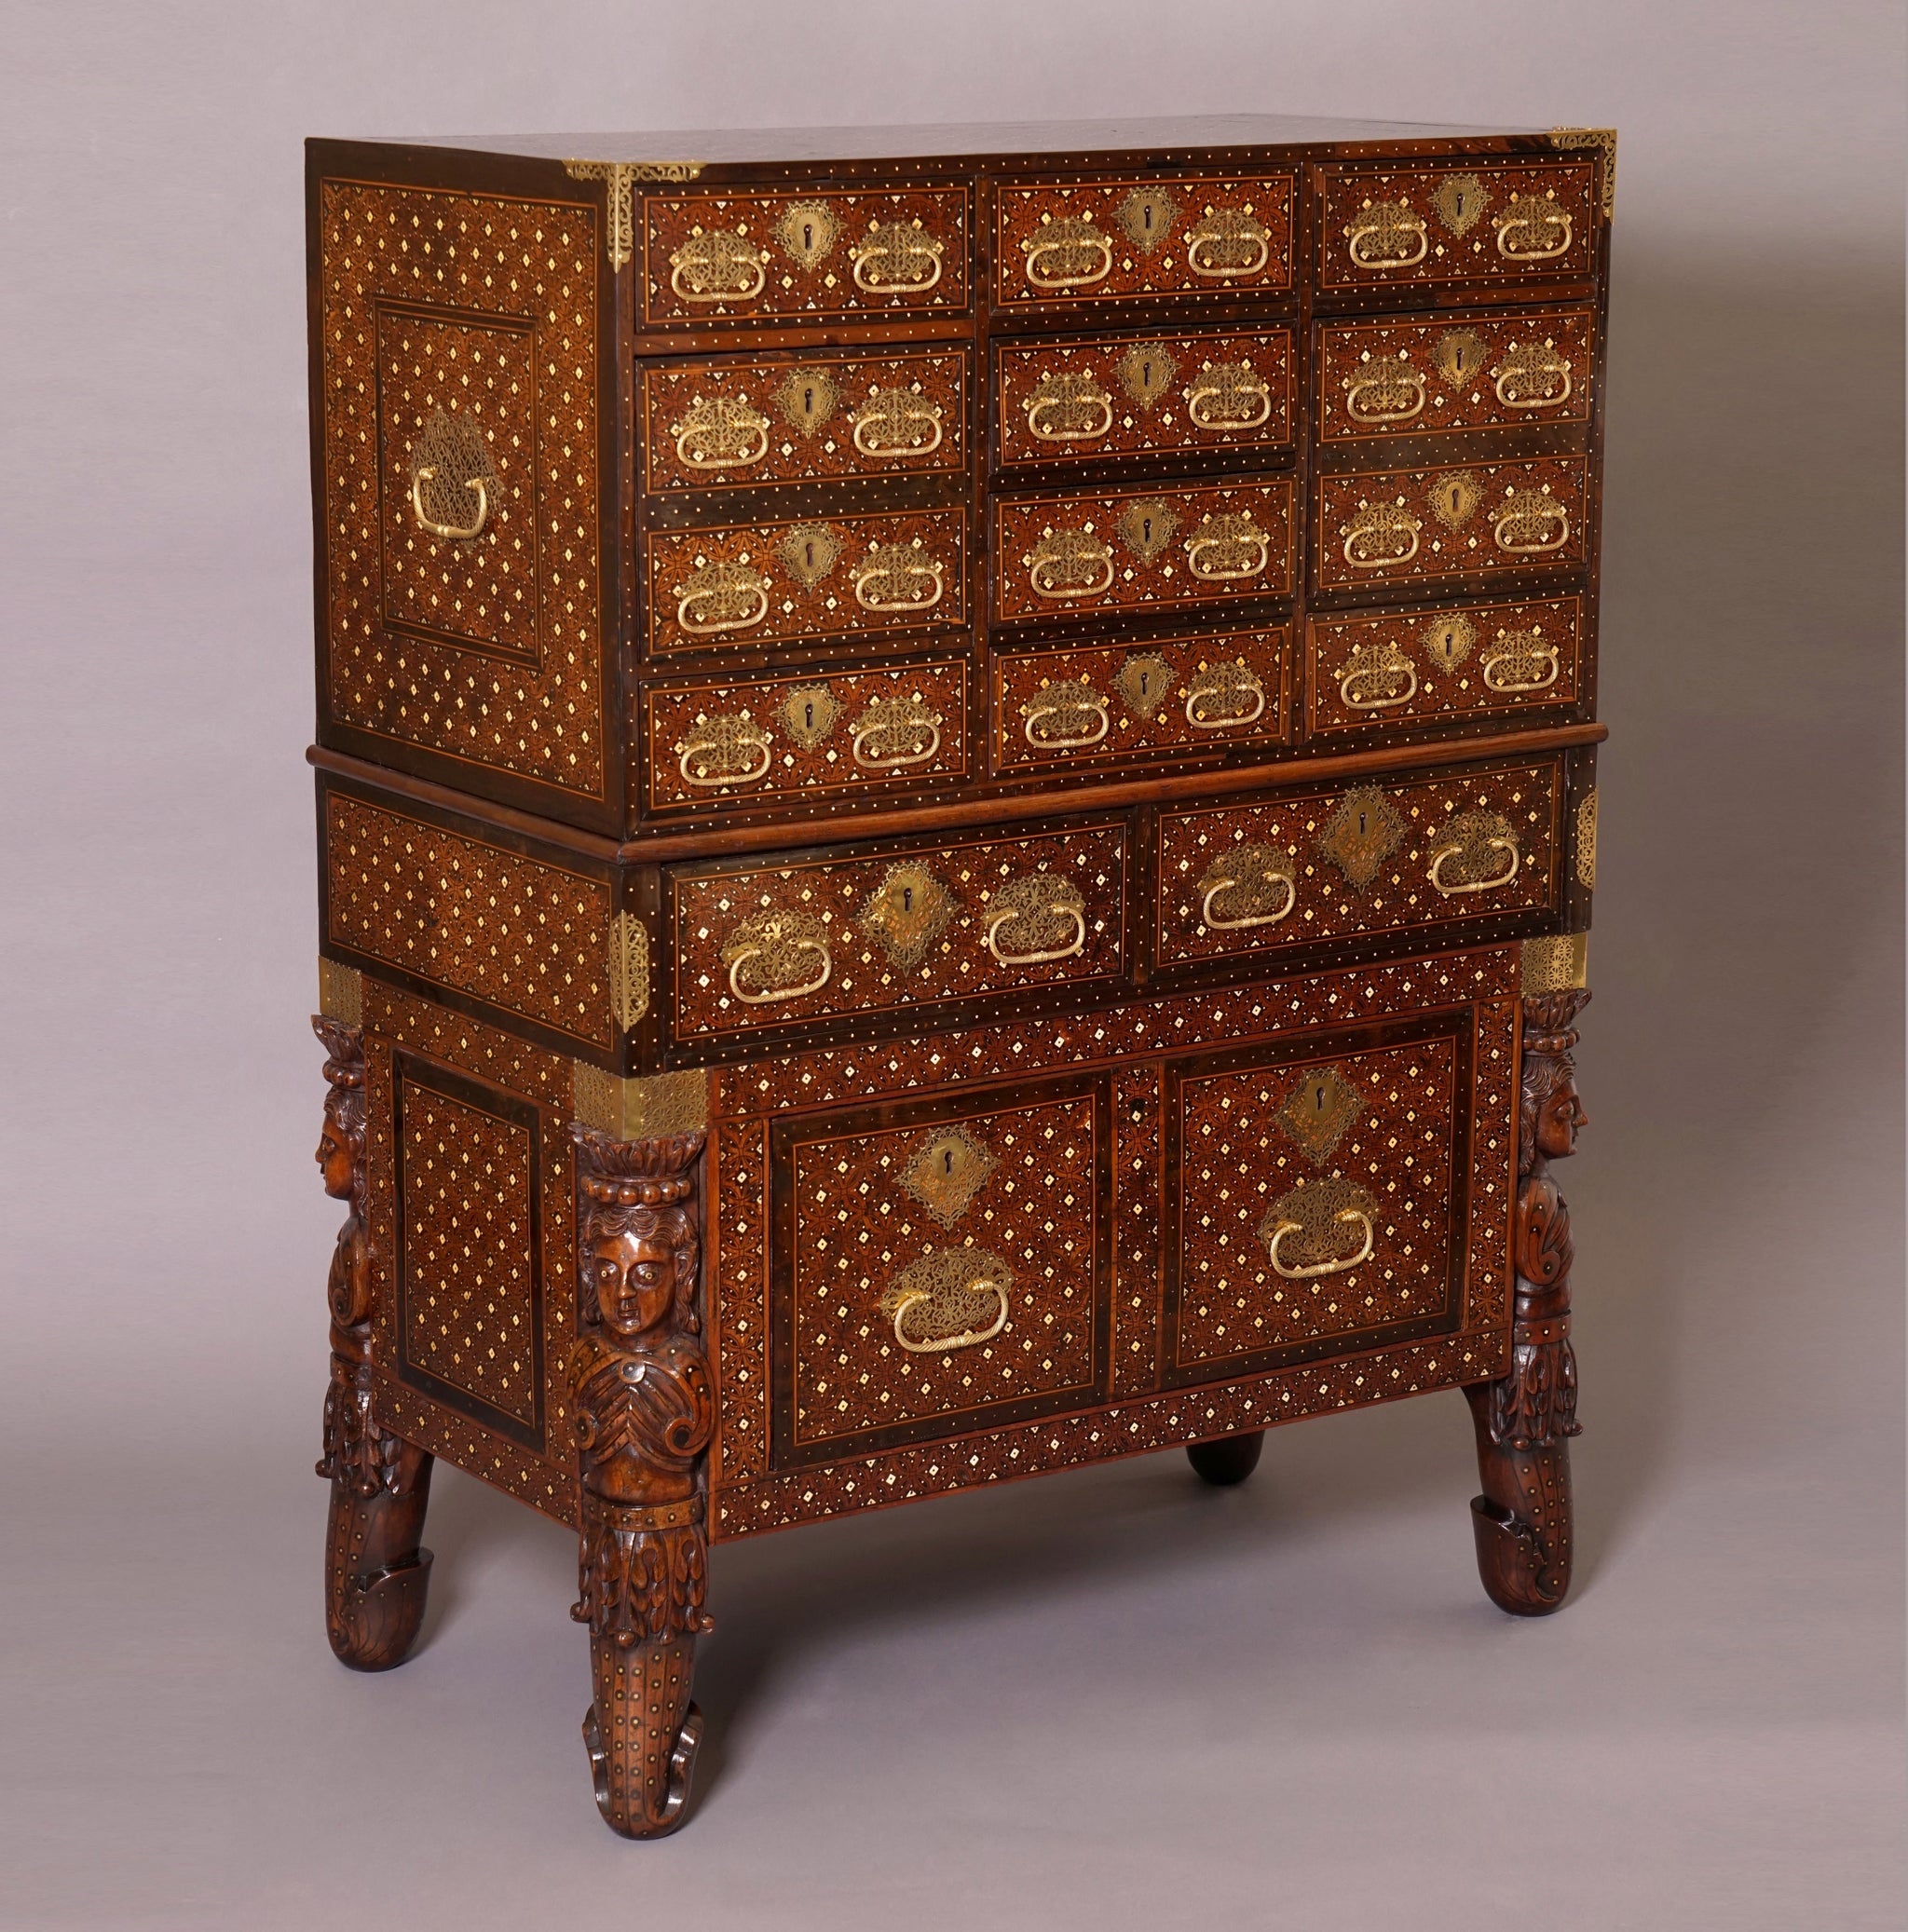 A 17th Century Indo-Portuguese Cabinet On Stand